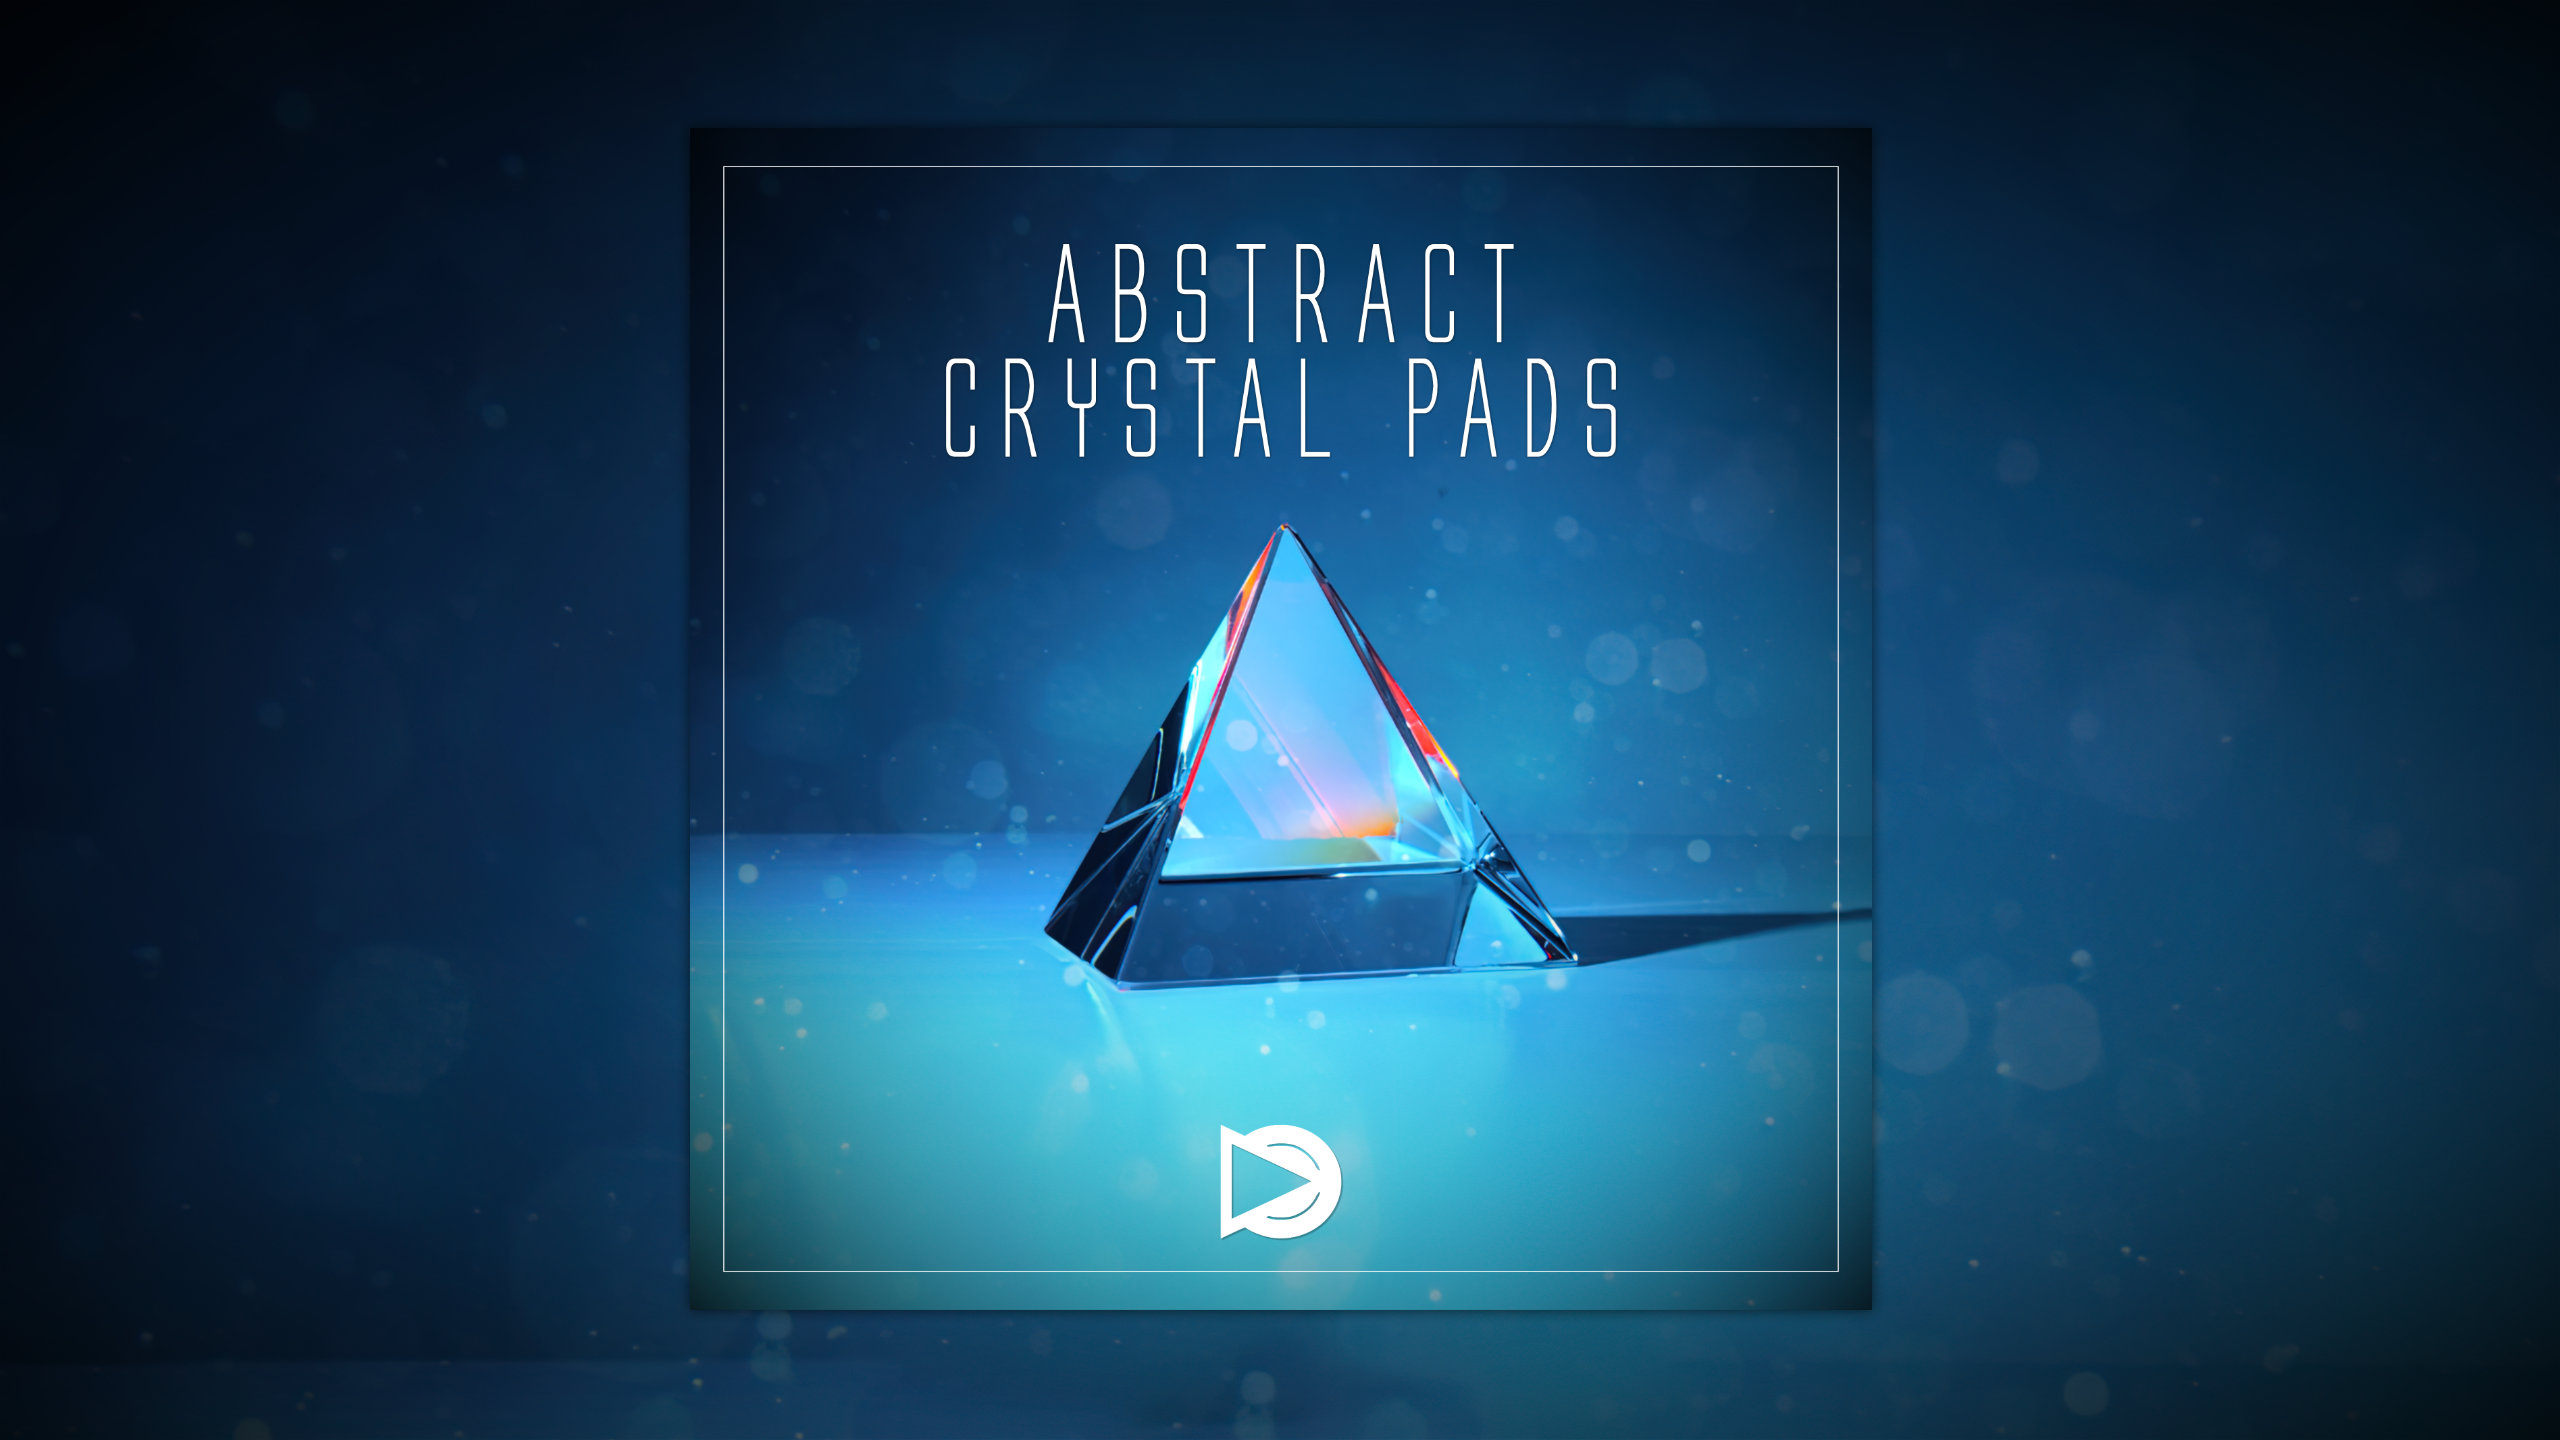 This free sampler has 30 abstract pads for ambient and new age music or even film scores